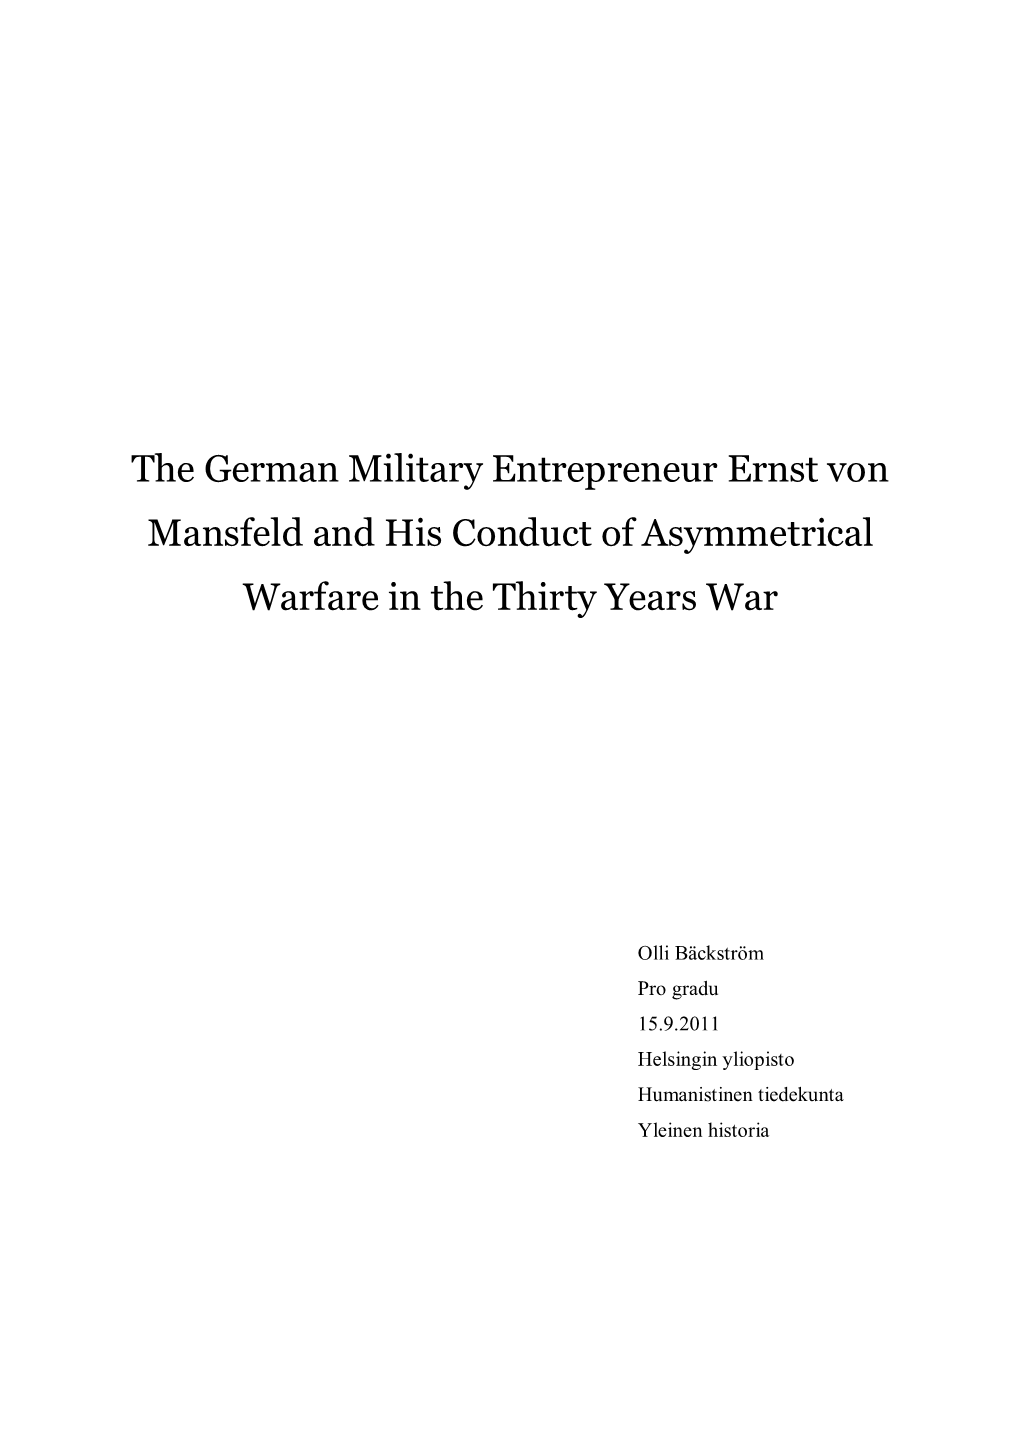 Ernst Von Mansfeld and His Conduct of Asymmetrical Warfare in the Thirty Years War